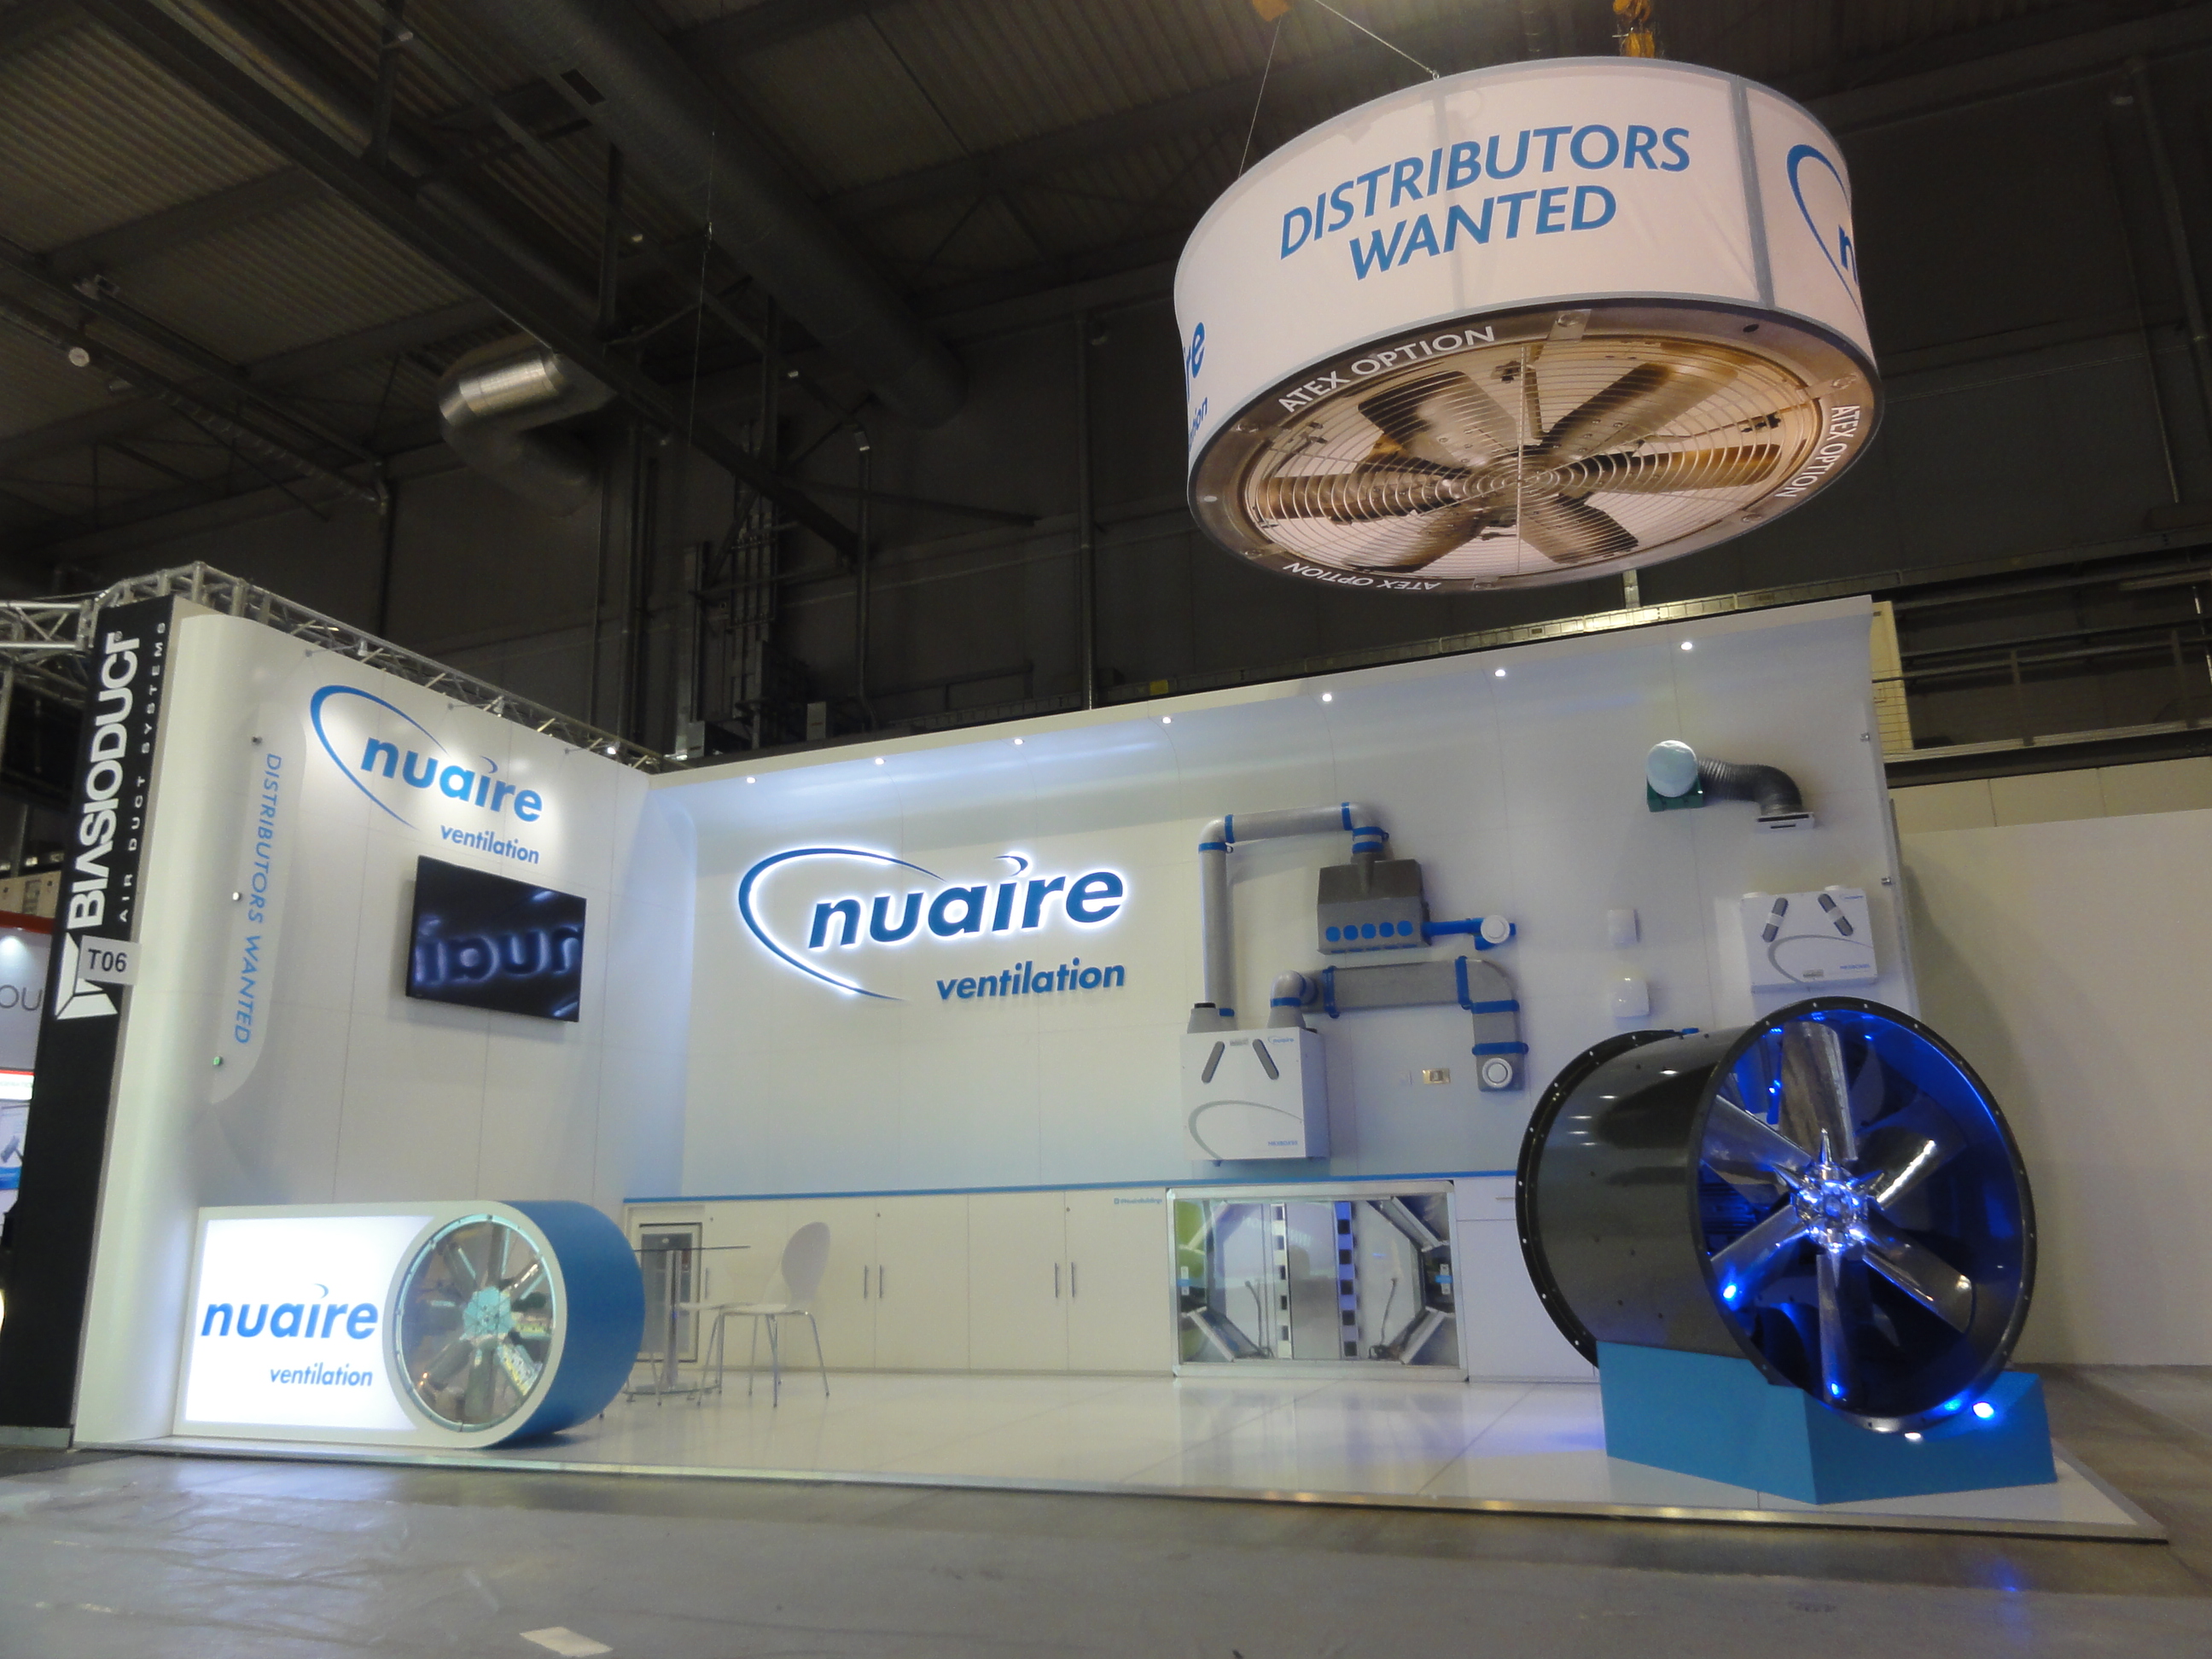 Nuaire - Bespoke Exhibition Stand - Imagine Events